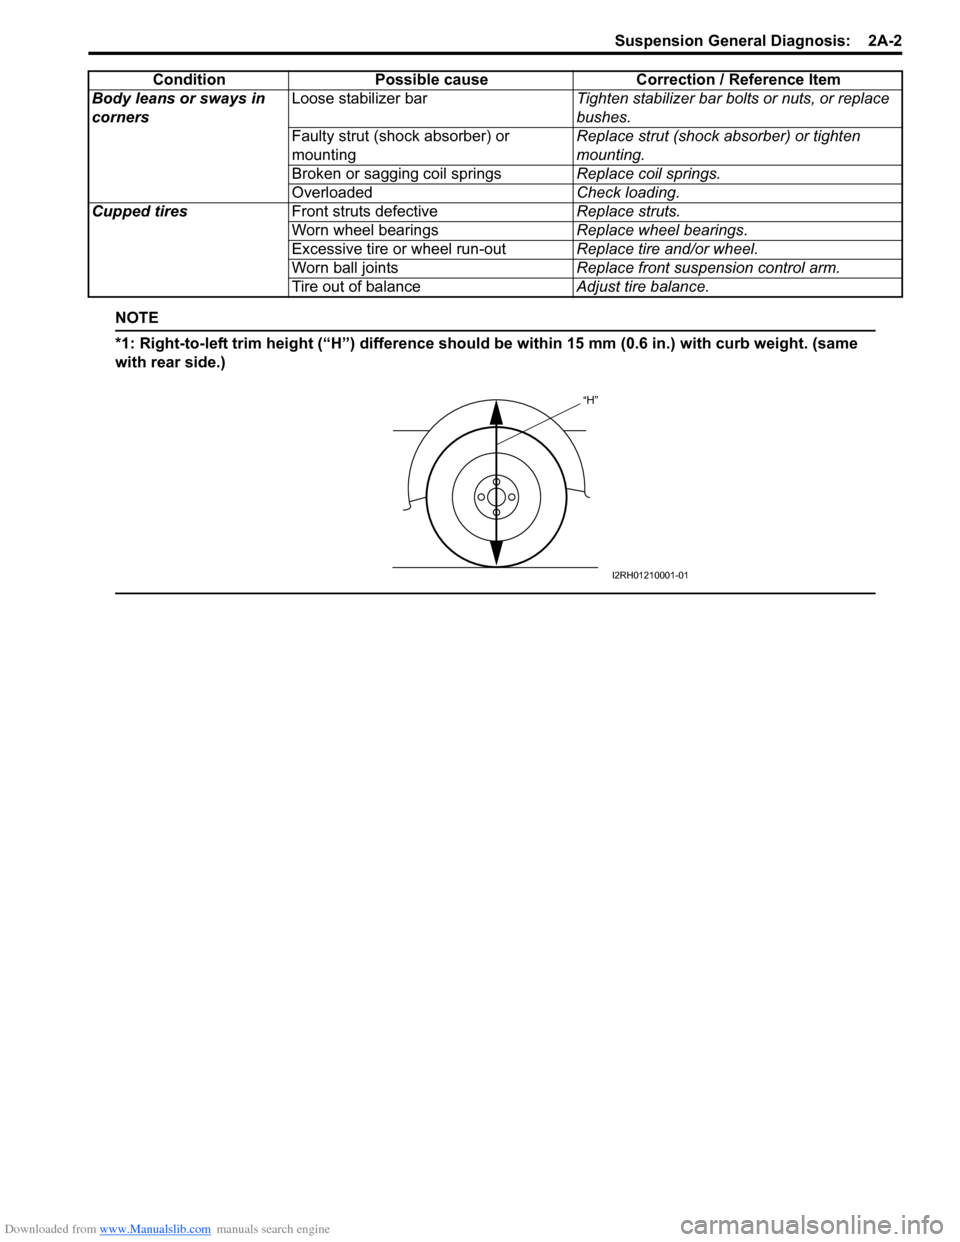 SUZUKI SWIFT 2006 2.G Service Service Manual Downloaded from www.Manualslib.com manuals search engine Suspension General Diagnosis:  2A-2
NOTE
*1: Right-to-left trim height (“H”) difference should be within 15 mm (0.6 in.) with curb weight. 